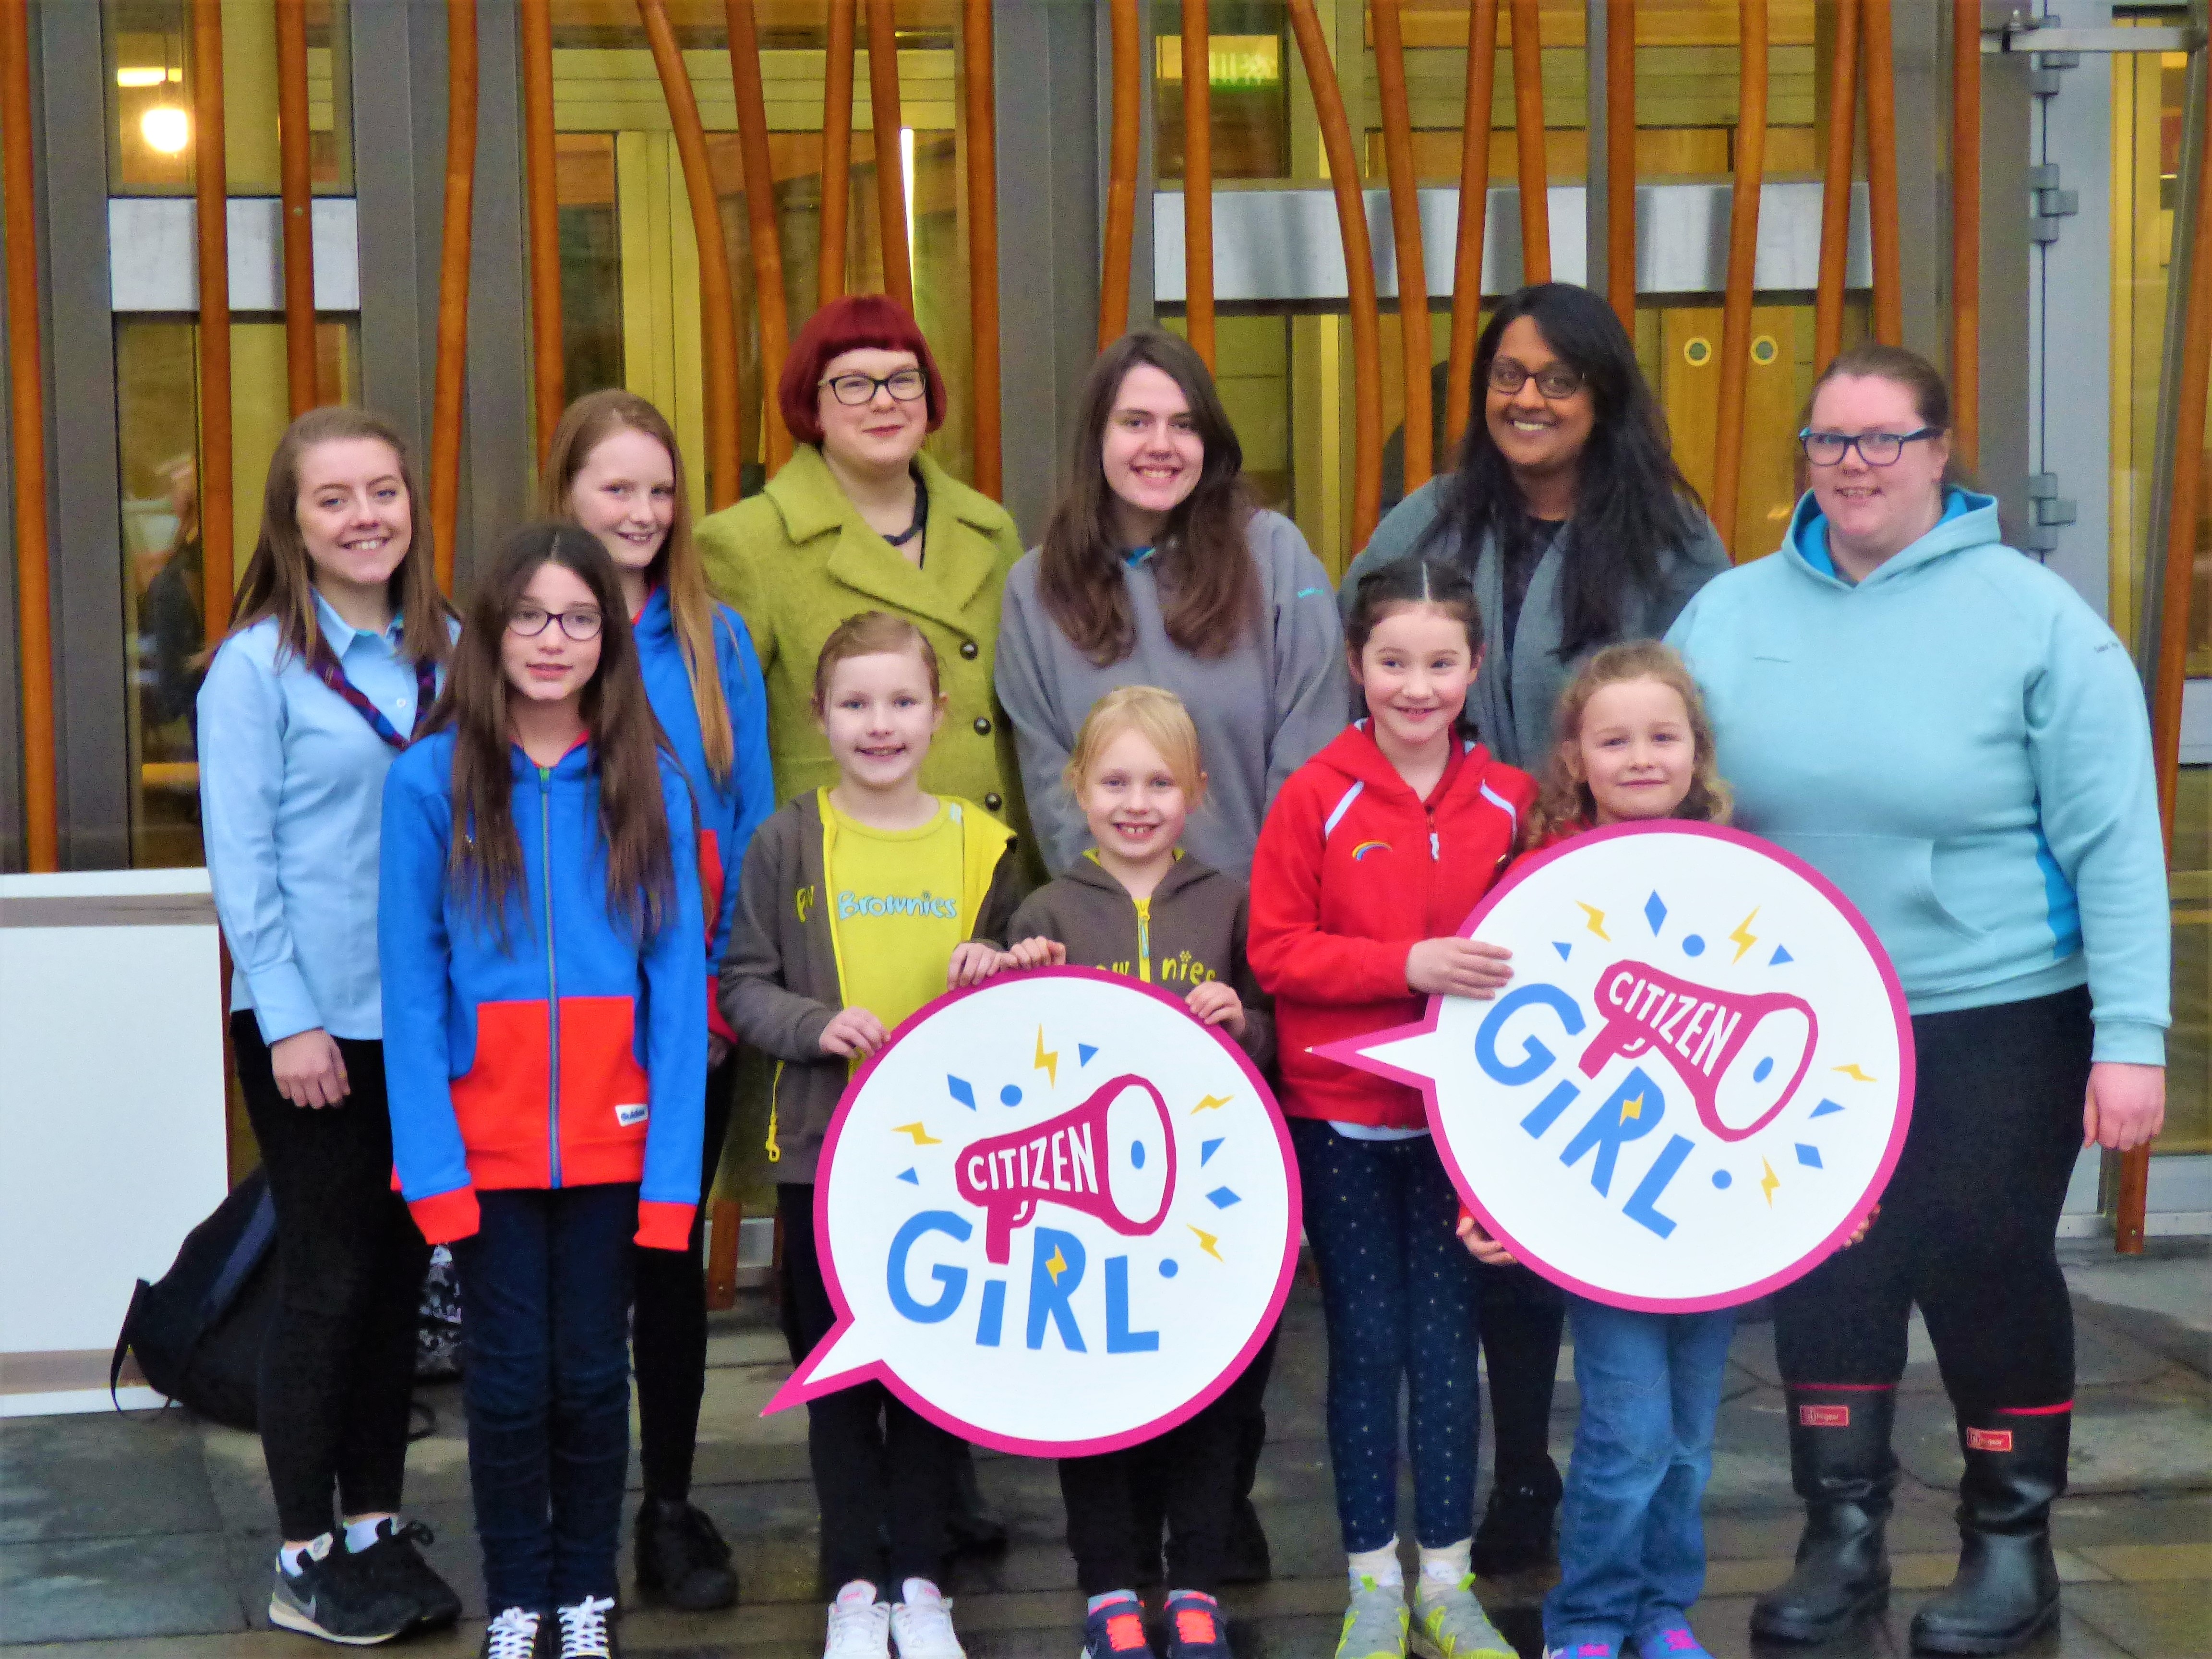 Emma Ritch of Women 50:50 (3rd from left back row) and Talat Yaqoob, co-founder of Women 50:50, (2nd from right back row) with Girlguiding Scotland members (Girlguiding Scotland/PA)